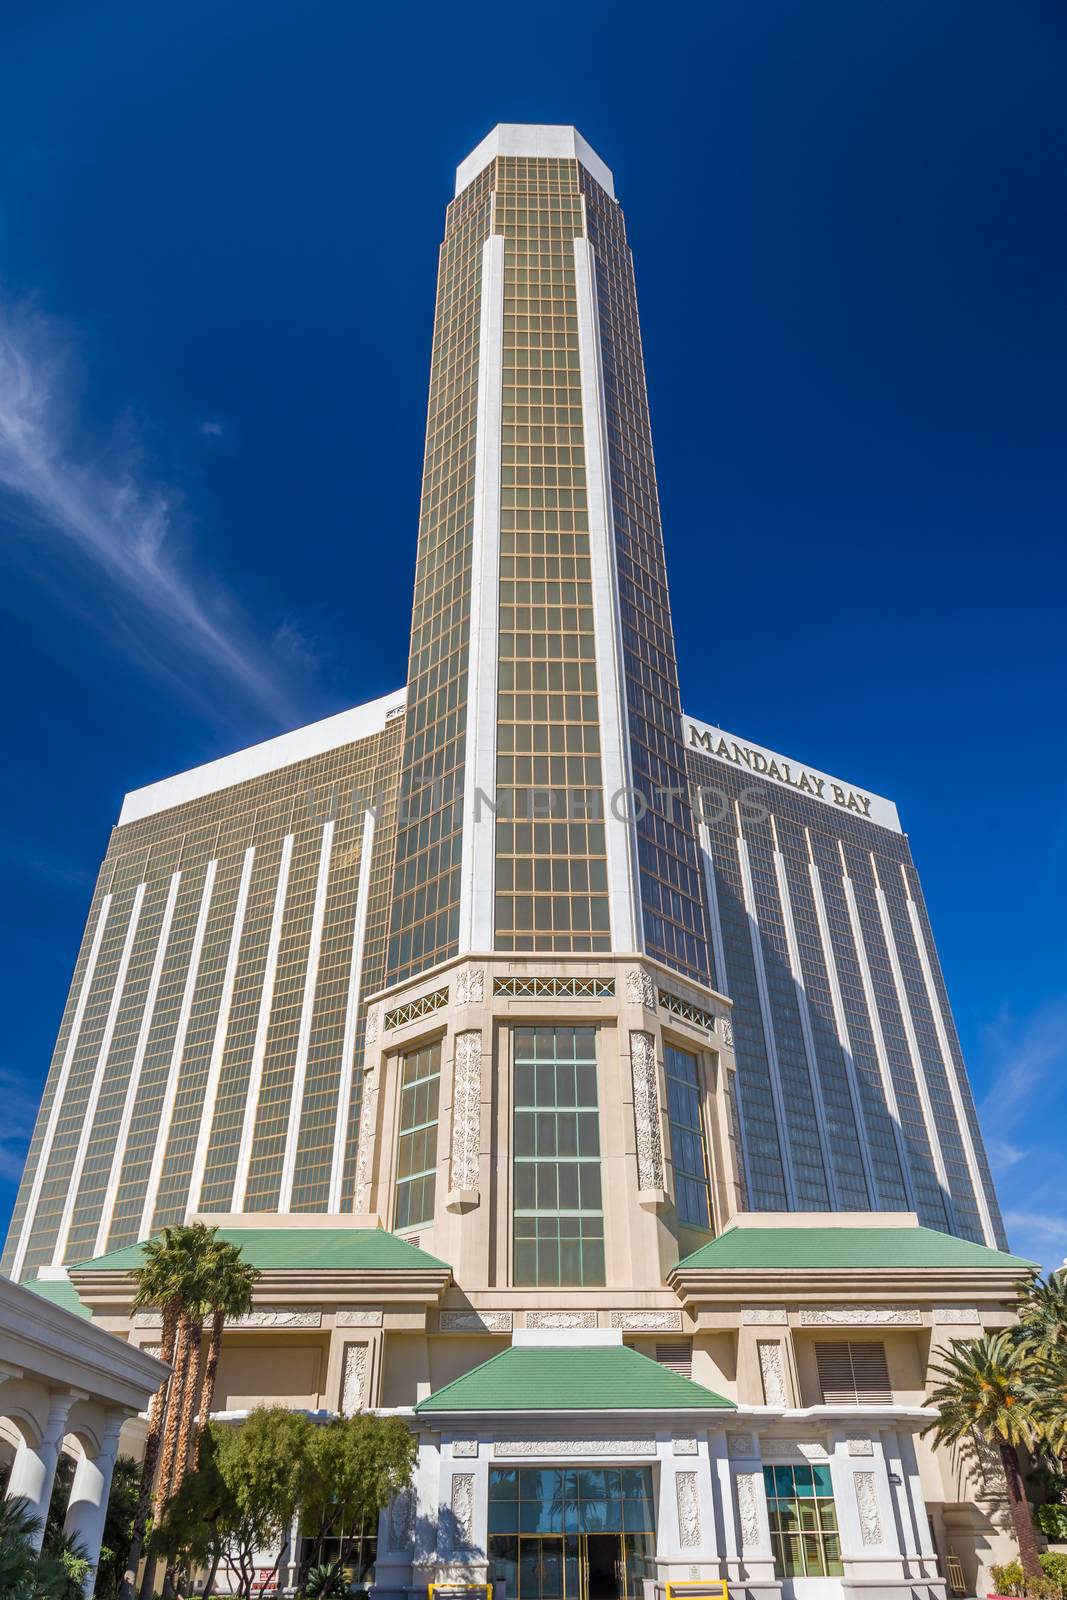 Mandalay Bay Hotel and Casino by wolterk